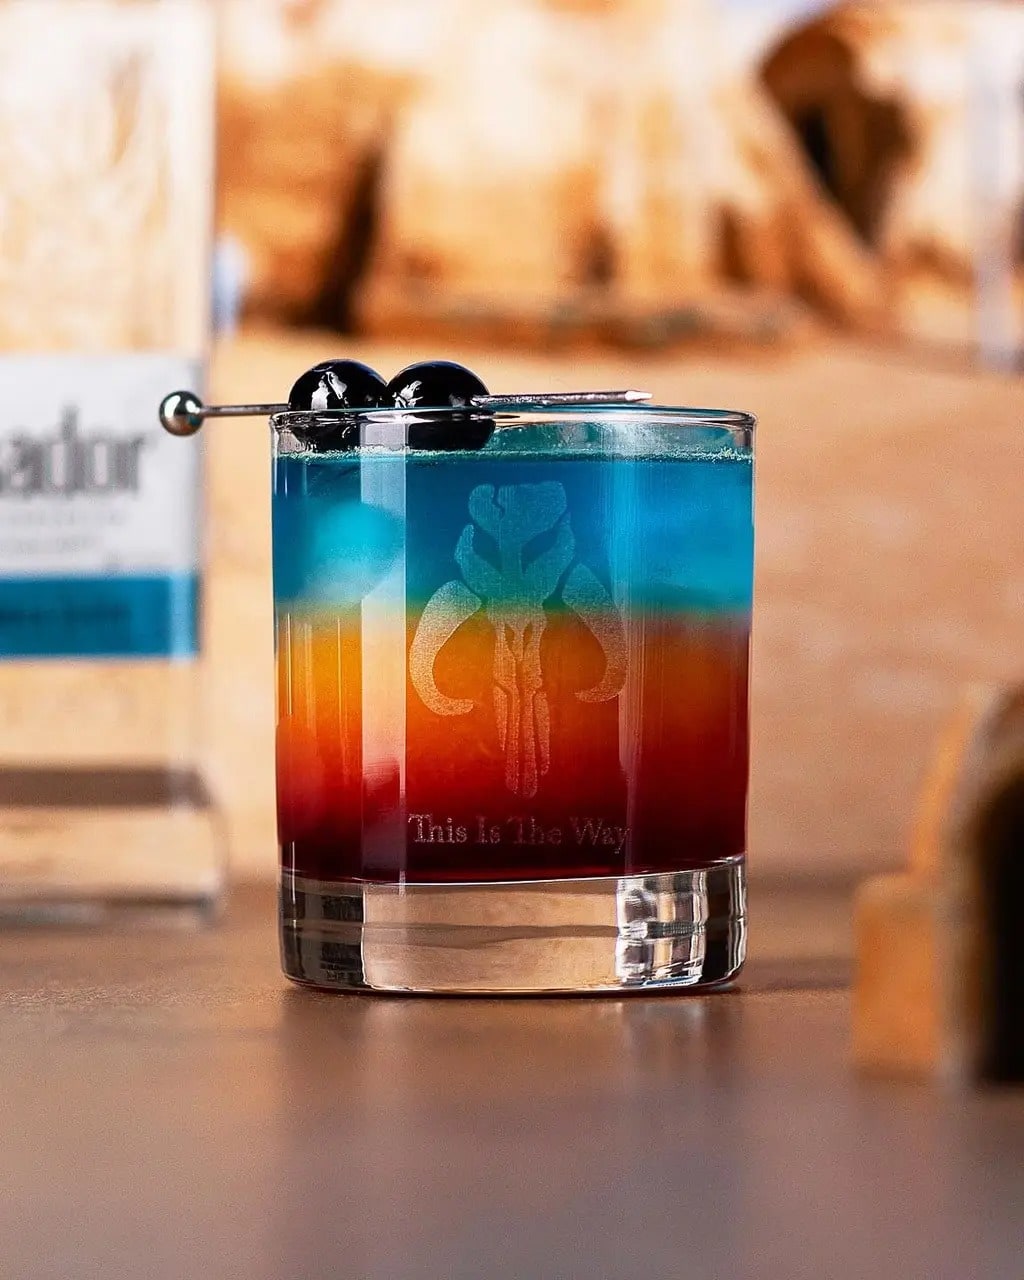 Tatooine Sunset cocktail in a Star Wars glass